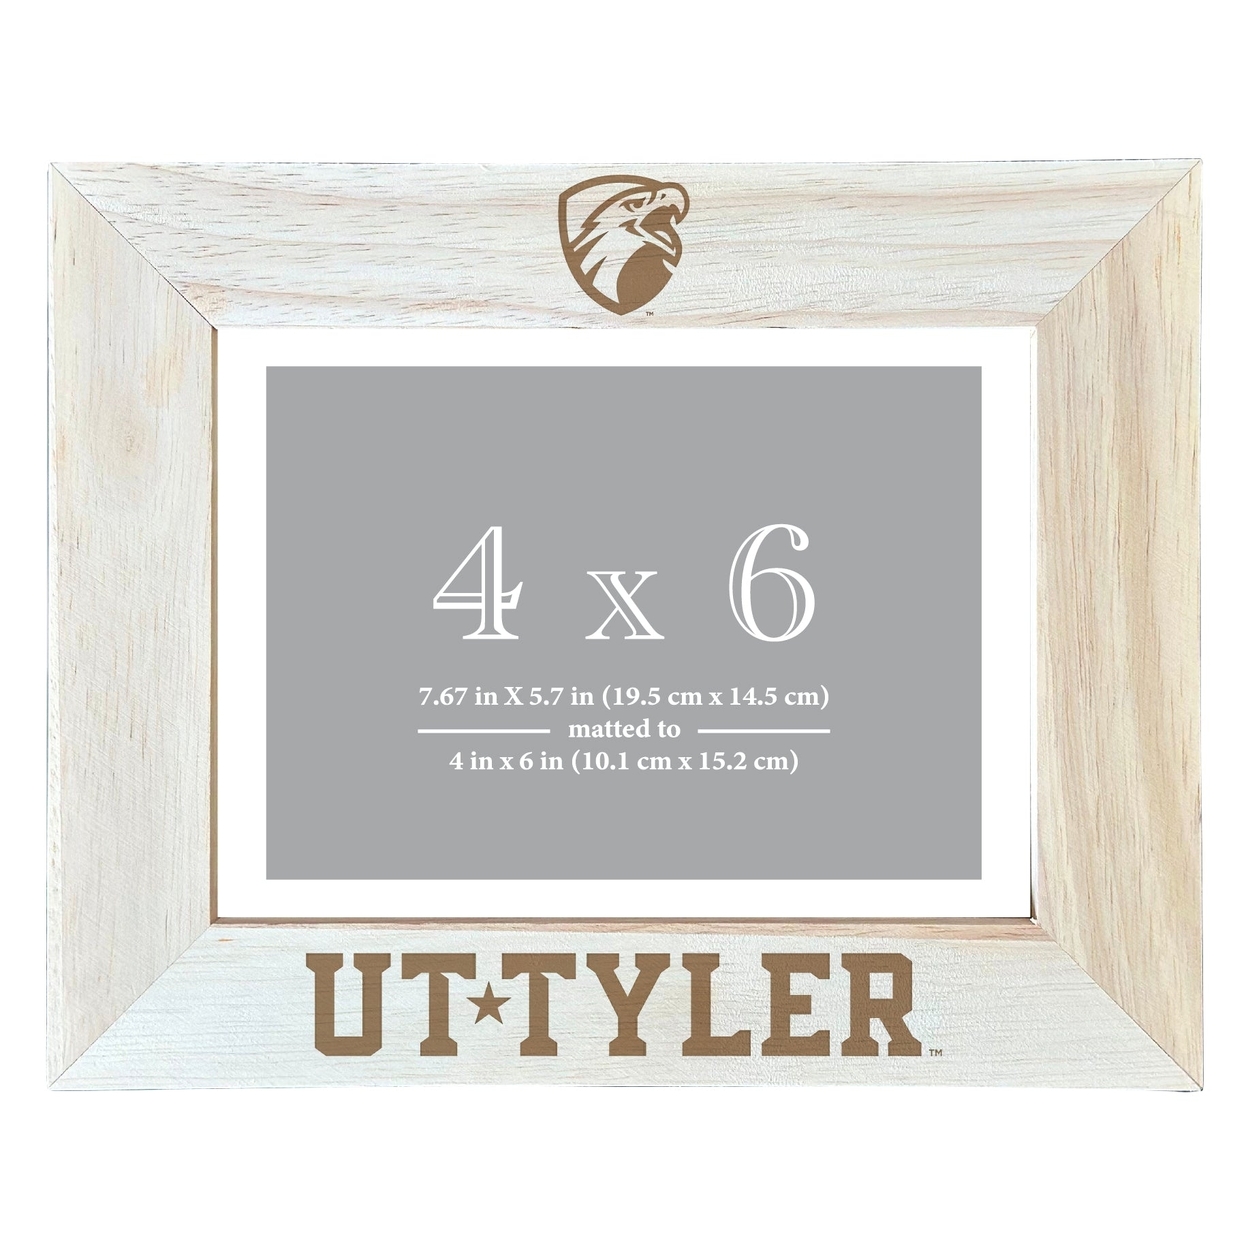 The University Of Texas At Tyler Wooden Photo Frame Matted To 4 X 6 Inch - Etched